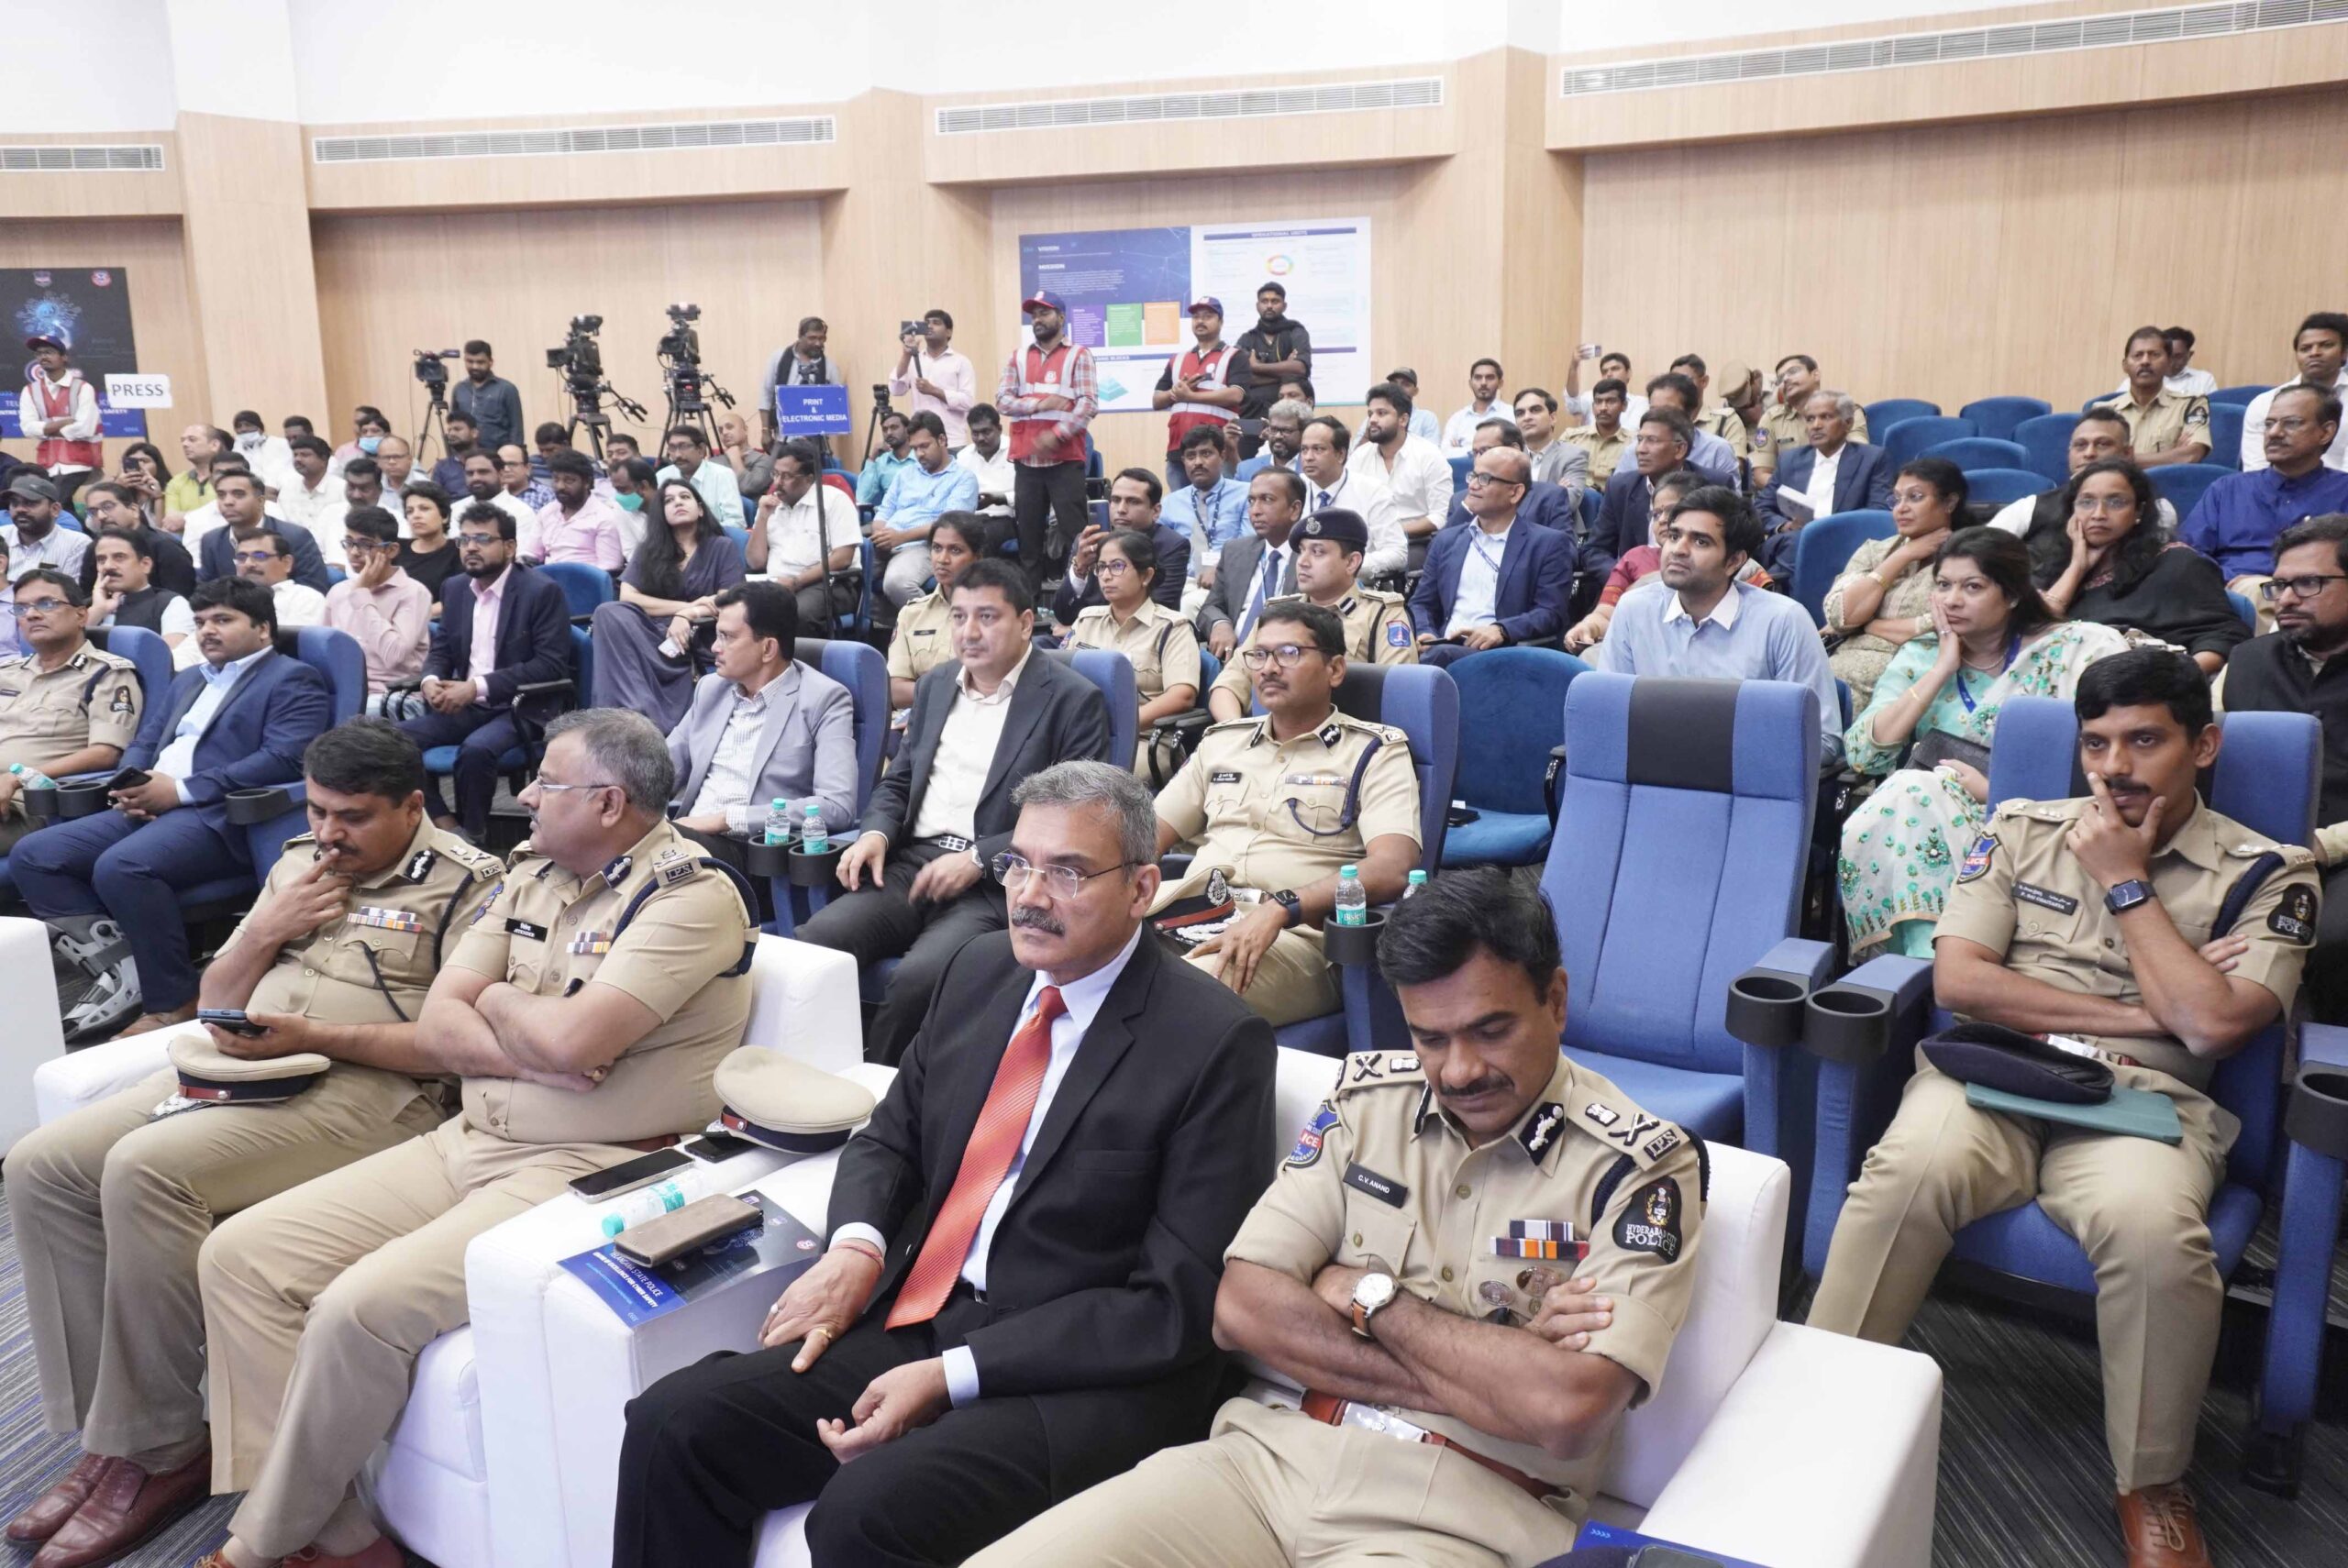 KTR inaugurated ‘Telangana State Police Centre of Excellence for Cyber Safety’, a first-of-its-kind initiative in India to secure the Cyber Ecosystem for the State.